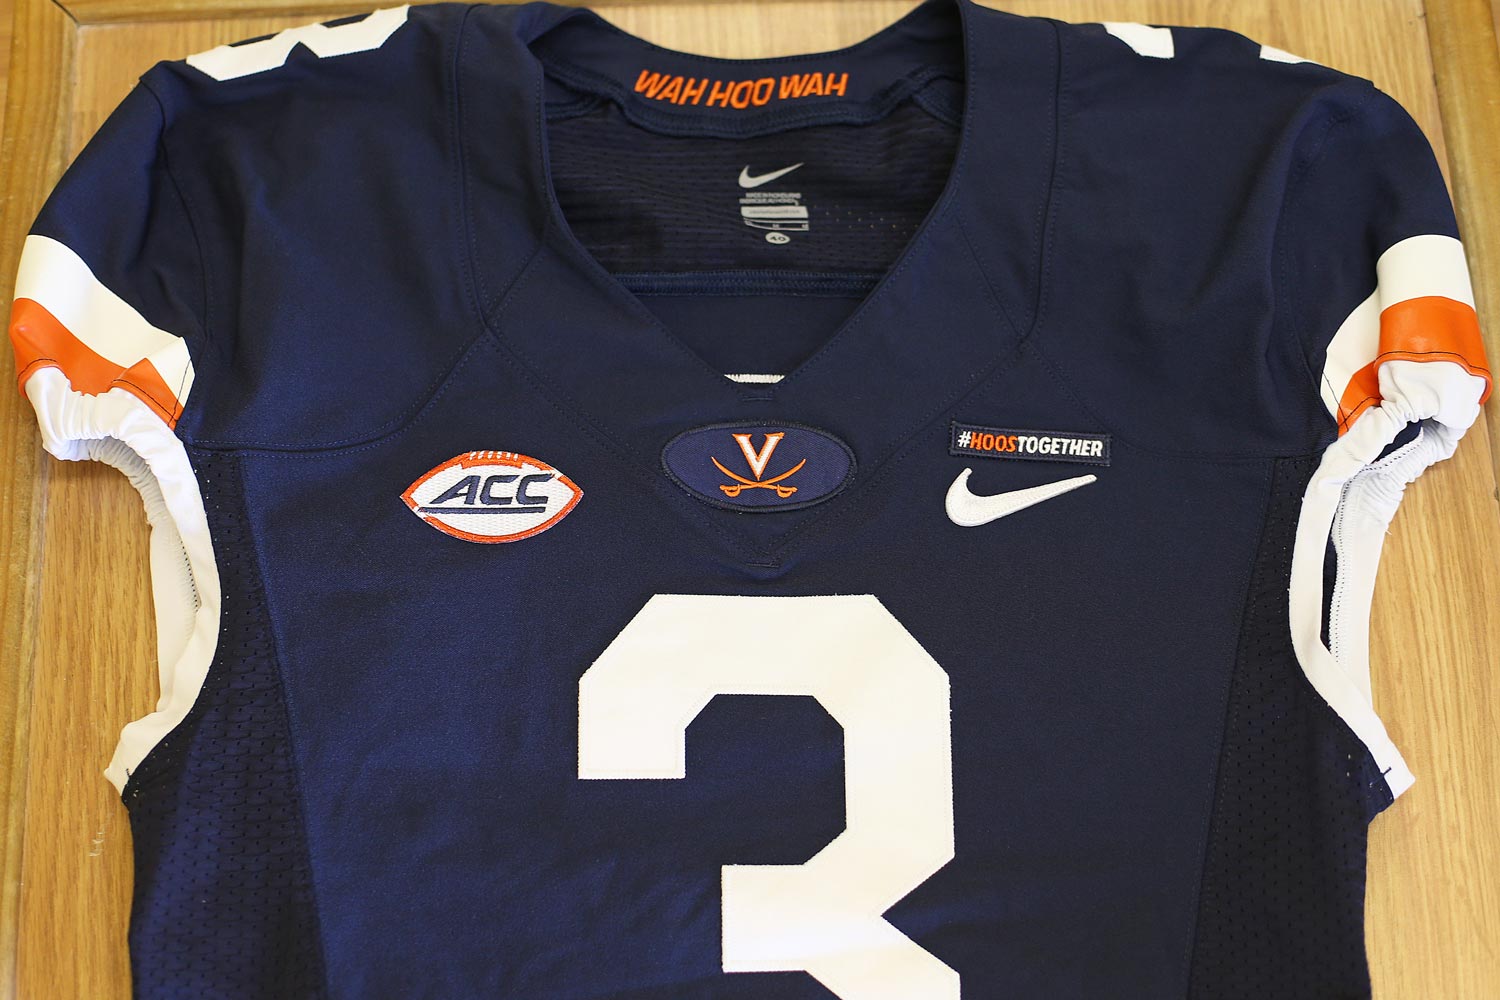 UVA Athletic uniform with a  #HoosTogether patch on it.